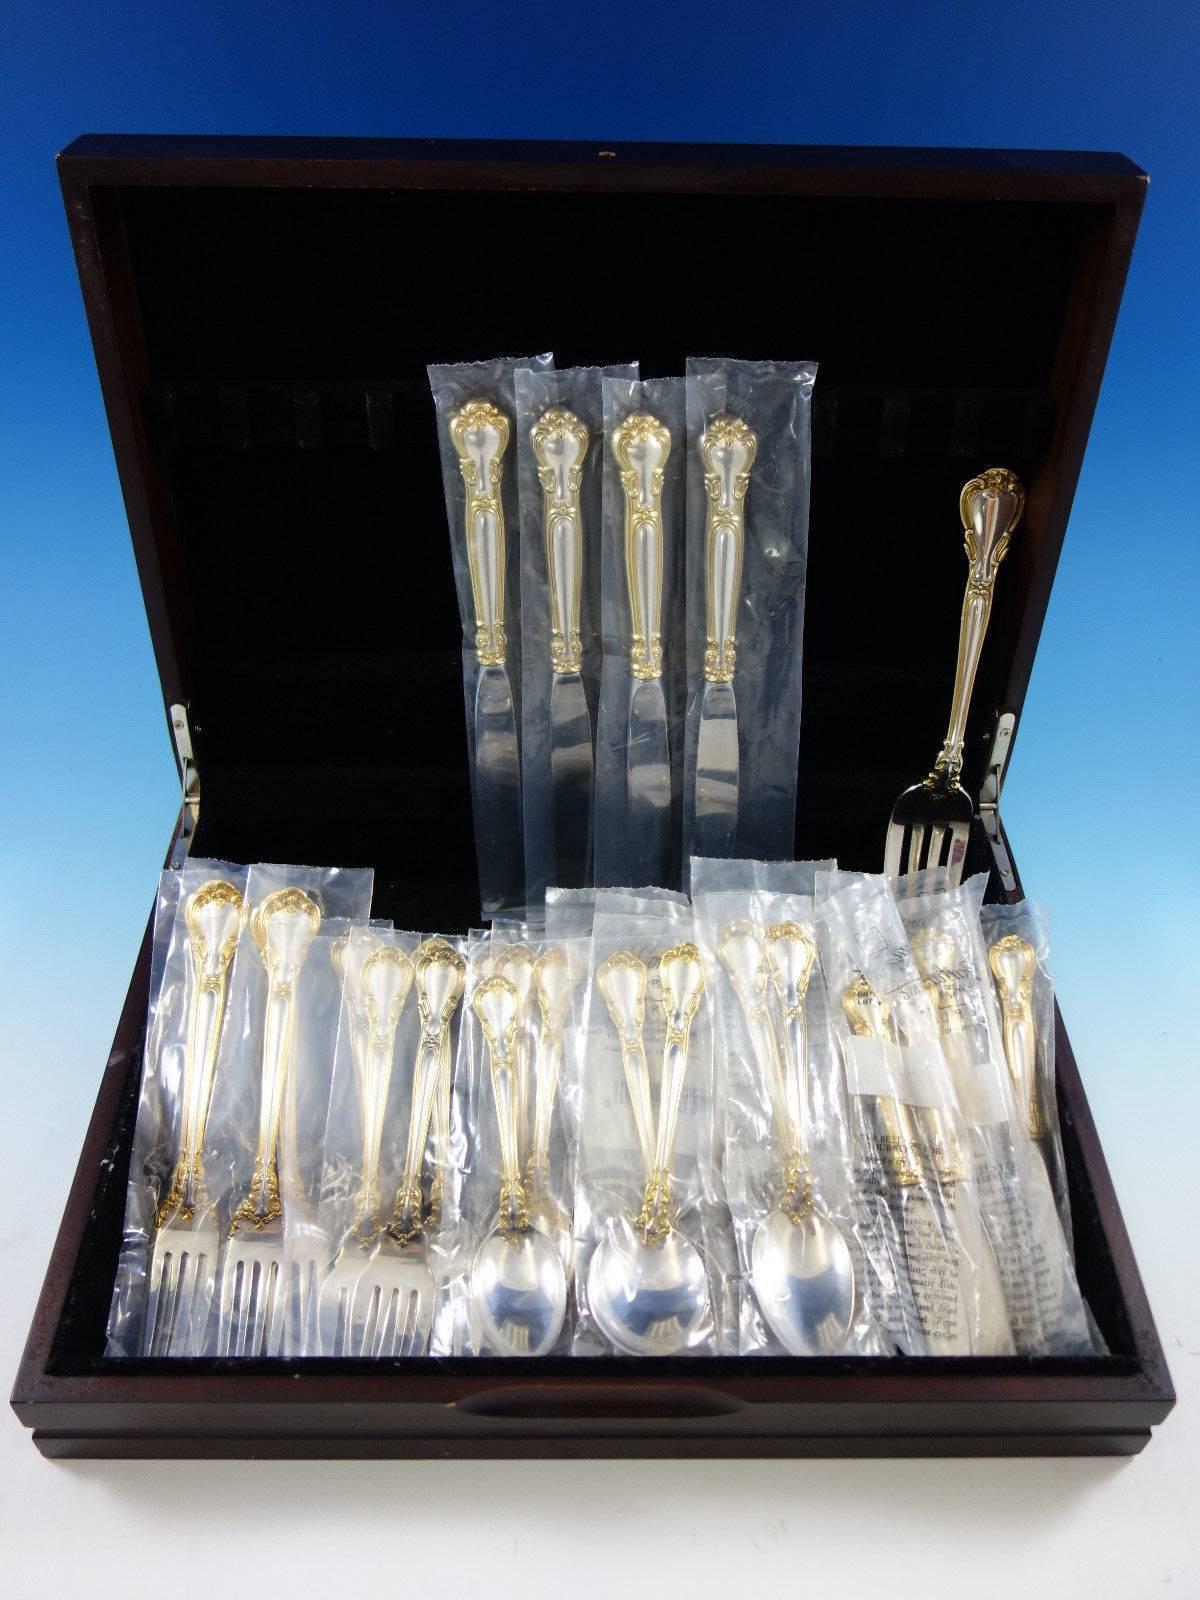 Unused place size Chantilly with gold accent by Gorham sterling silver flatware set, 29 pieces. Great starter set! This set includes: Four place size knives, 9 1/4